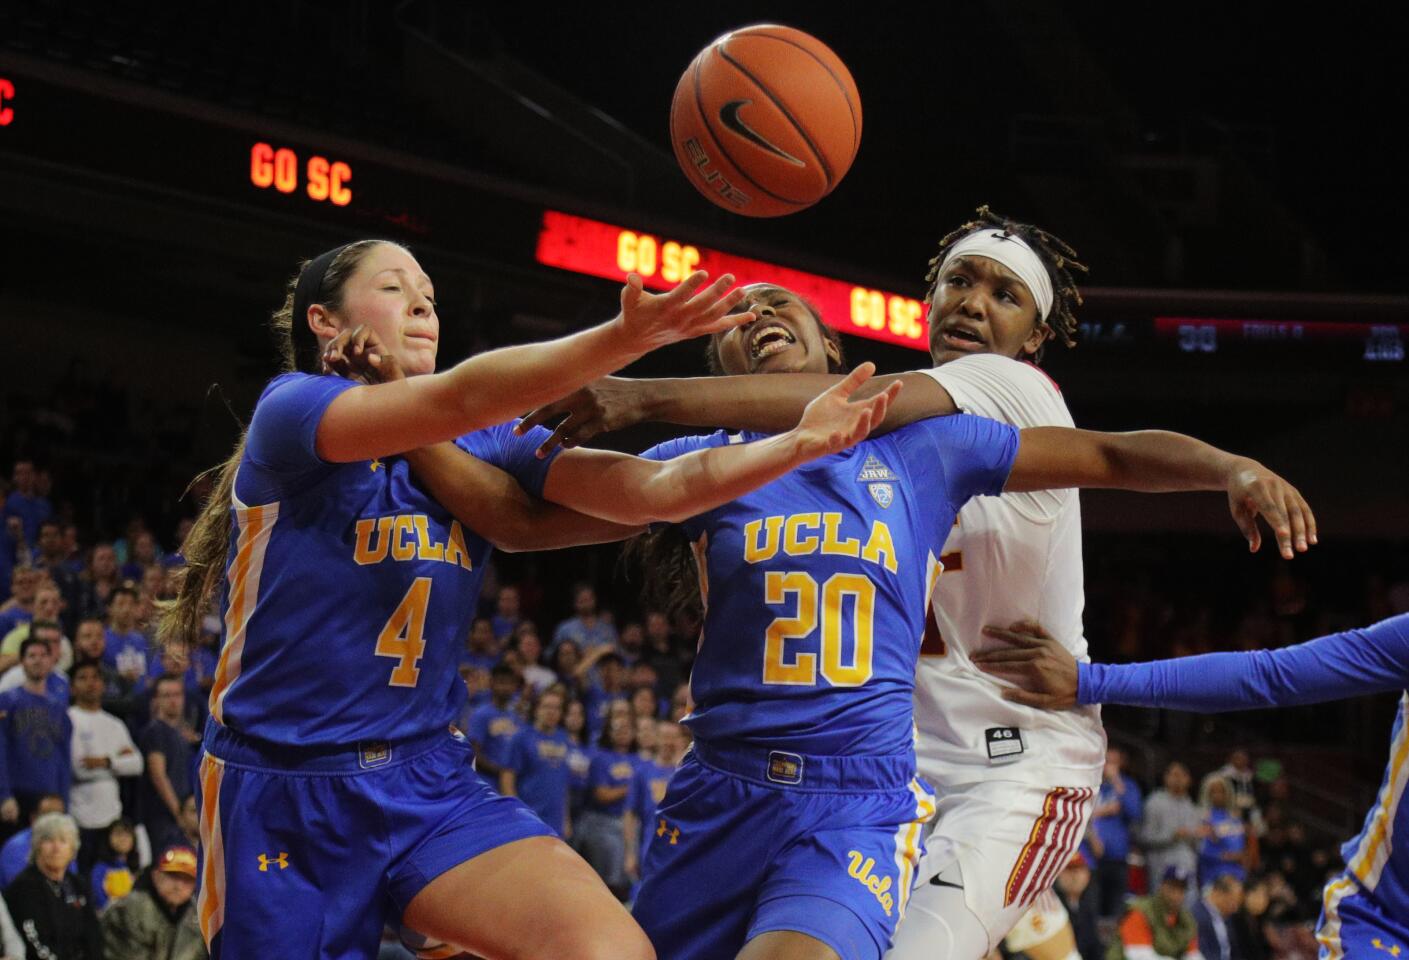 UCLA guard Charisma Osborne (20) gets hit by USC guard Aliyah Jeune (11) while battling for a rebound in overtime of a game Jan. 17 at Galen Center.